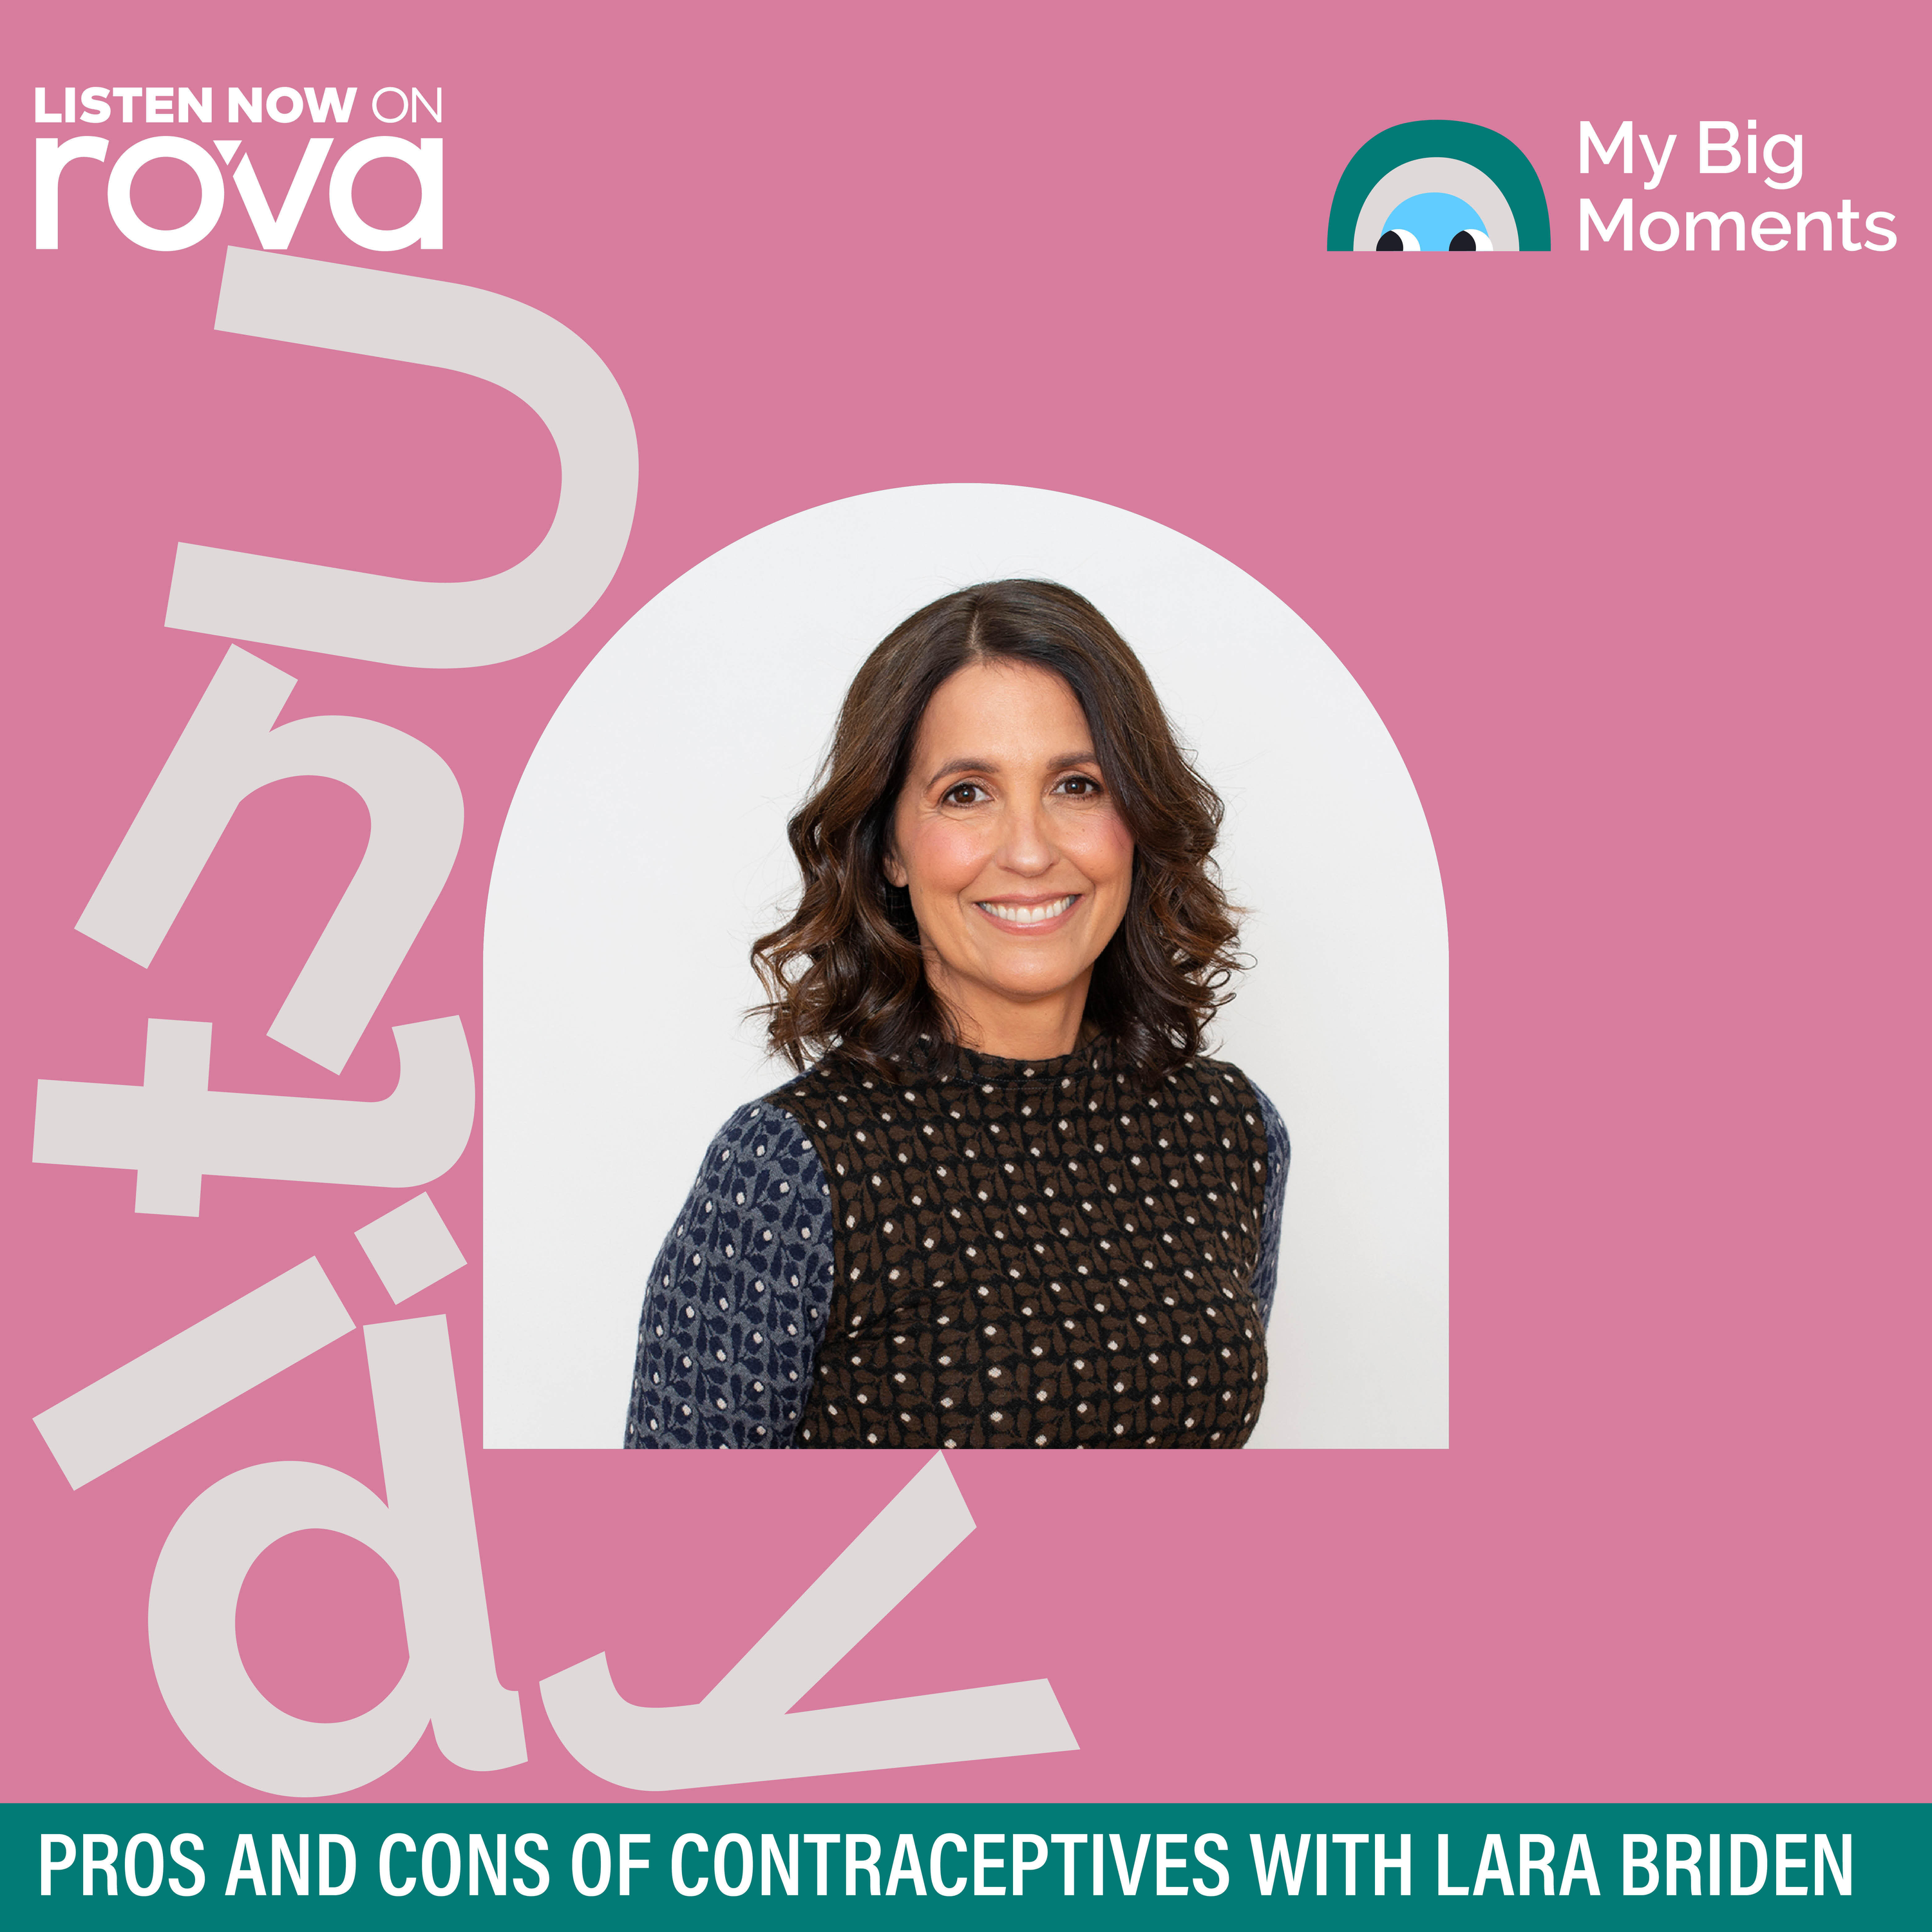 Pros and Cons of Contraception with Dr Lara Briden